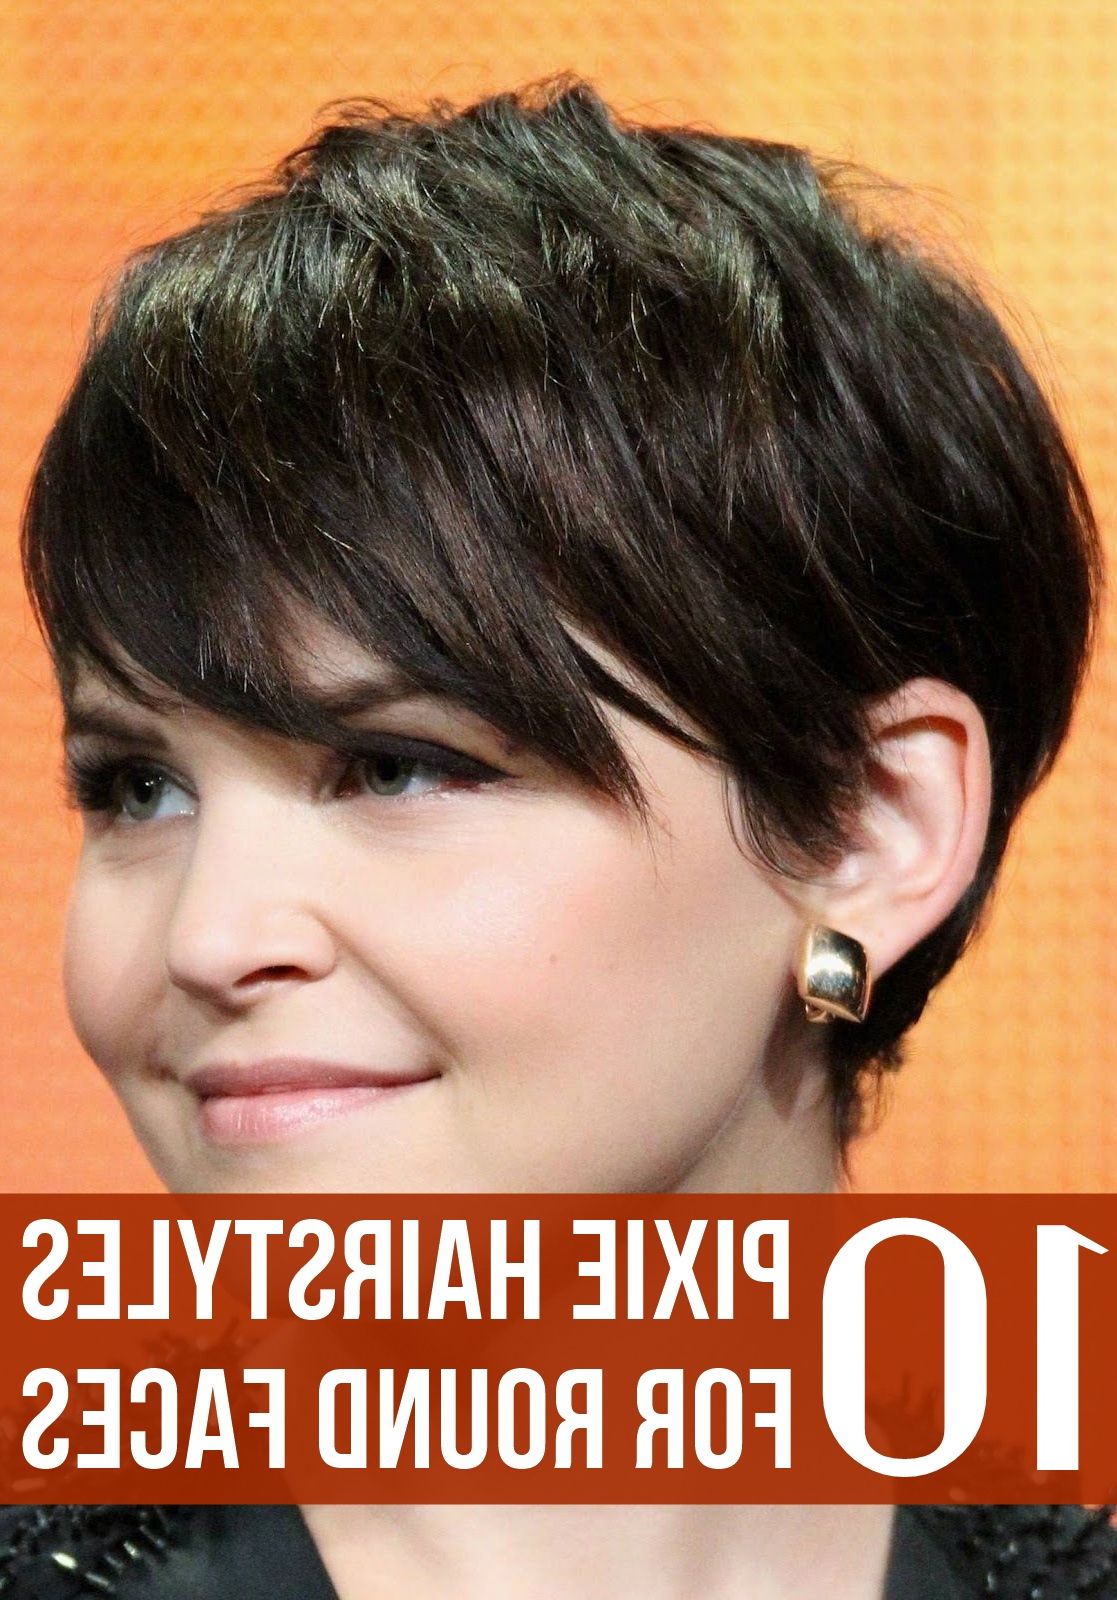 Top 10 Pixie Hairstyles For Round Faces Intended For Cropped Haircuts For A Round Face (View 5 of 20)